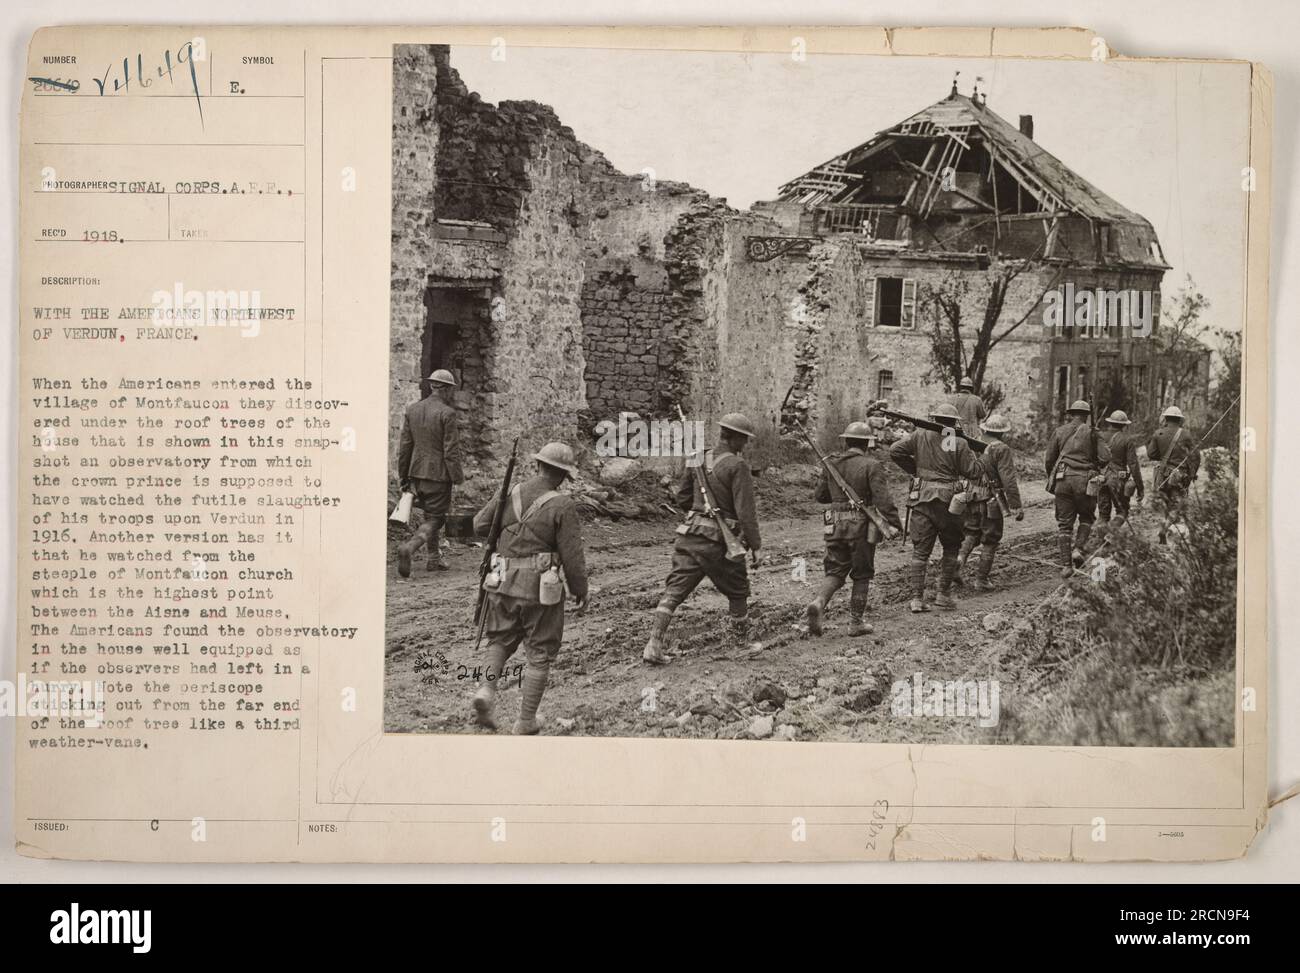 American soldiers discovering a German observatory in the village of Montfaucon, France during World War I. The observatory was supposedly used by the crown prince to watch the failed attacks on Verdun. The soldiers found the observatory well-equipped, with a periscope extending from the roof. Stock Photo